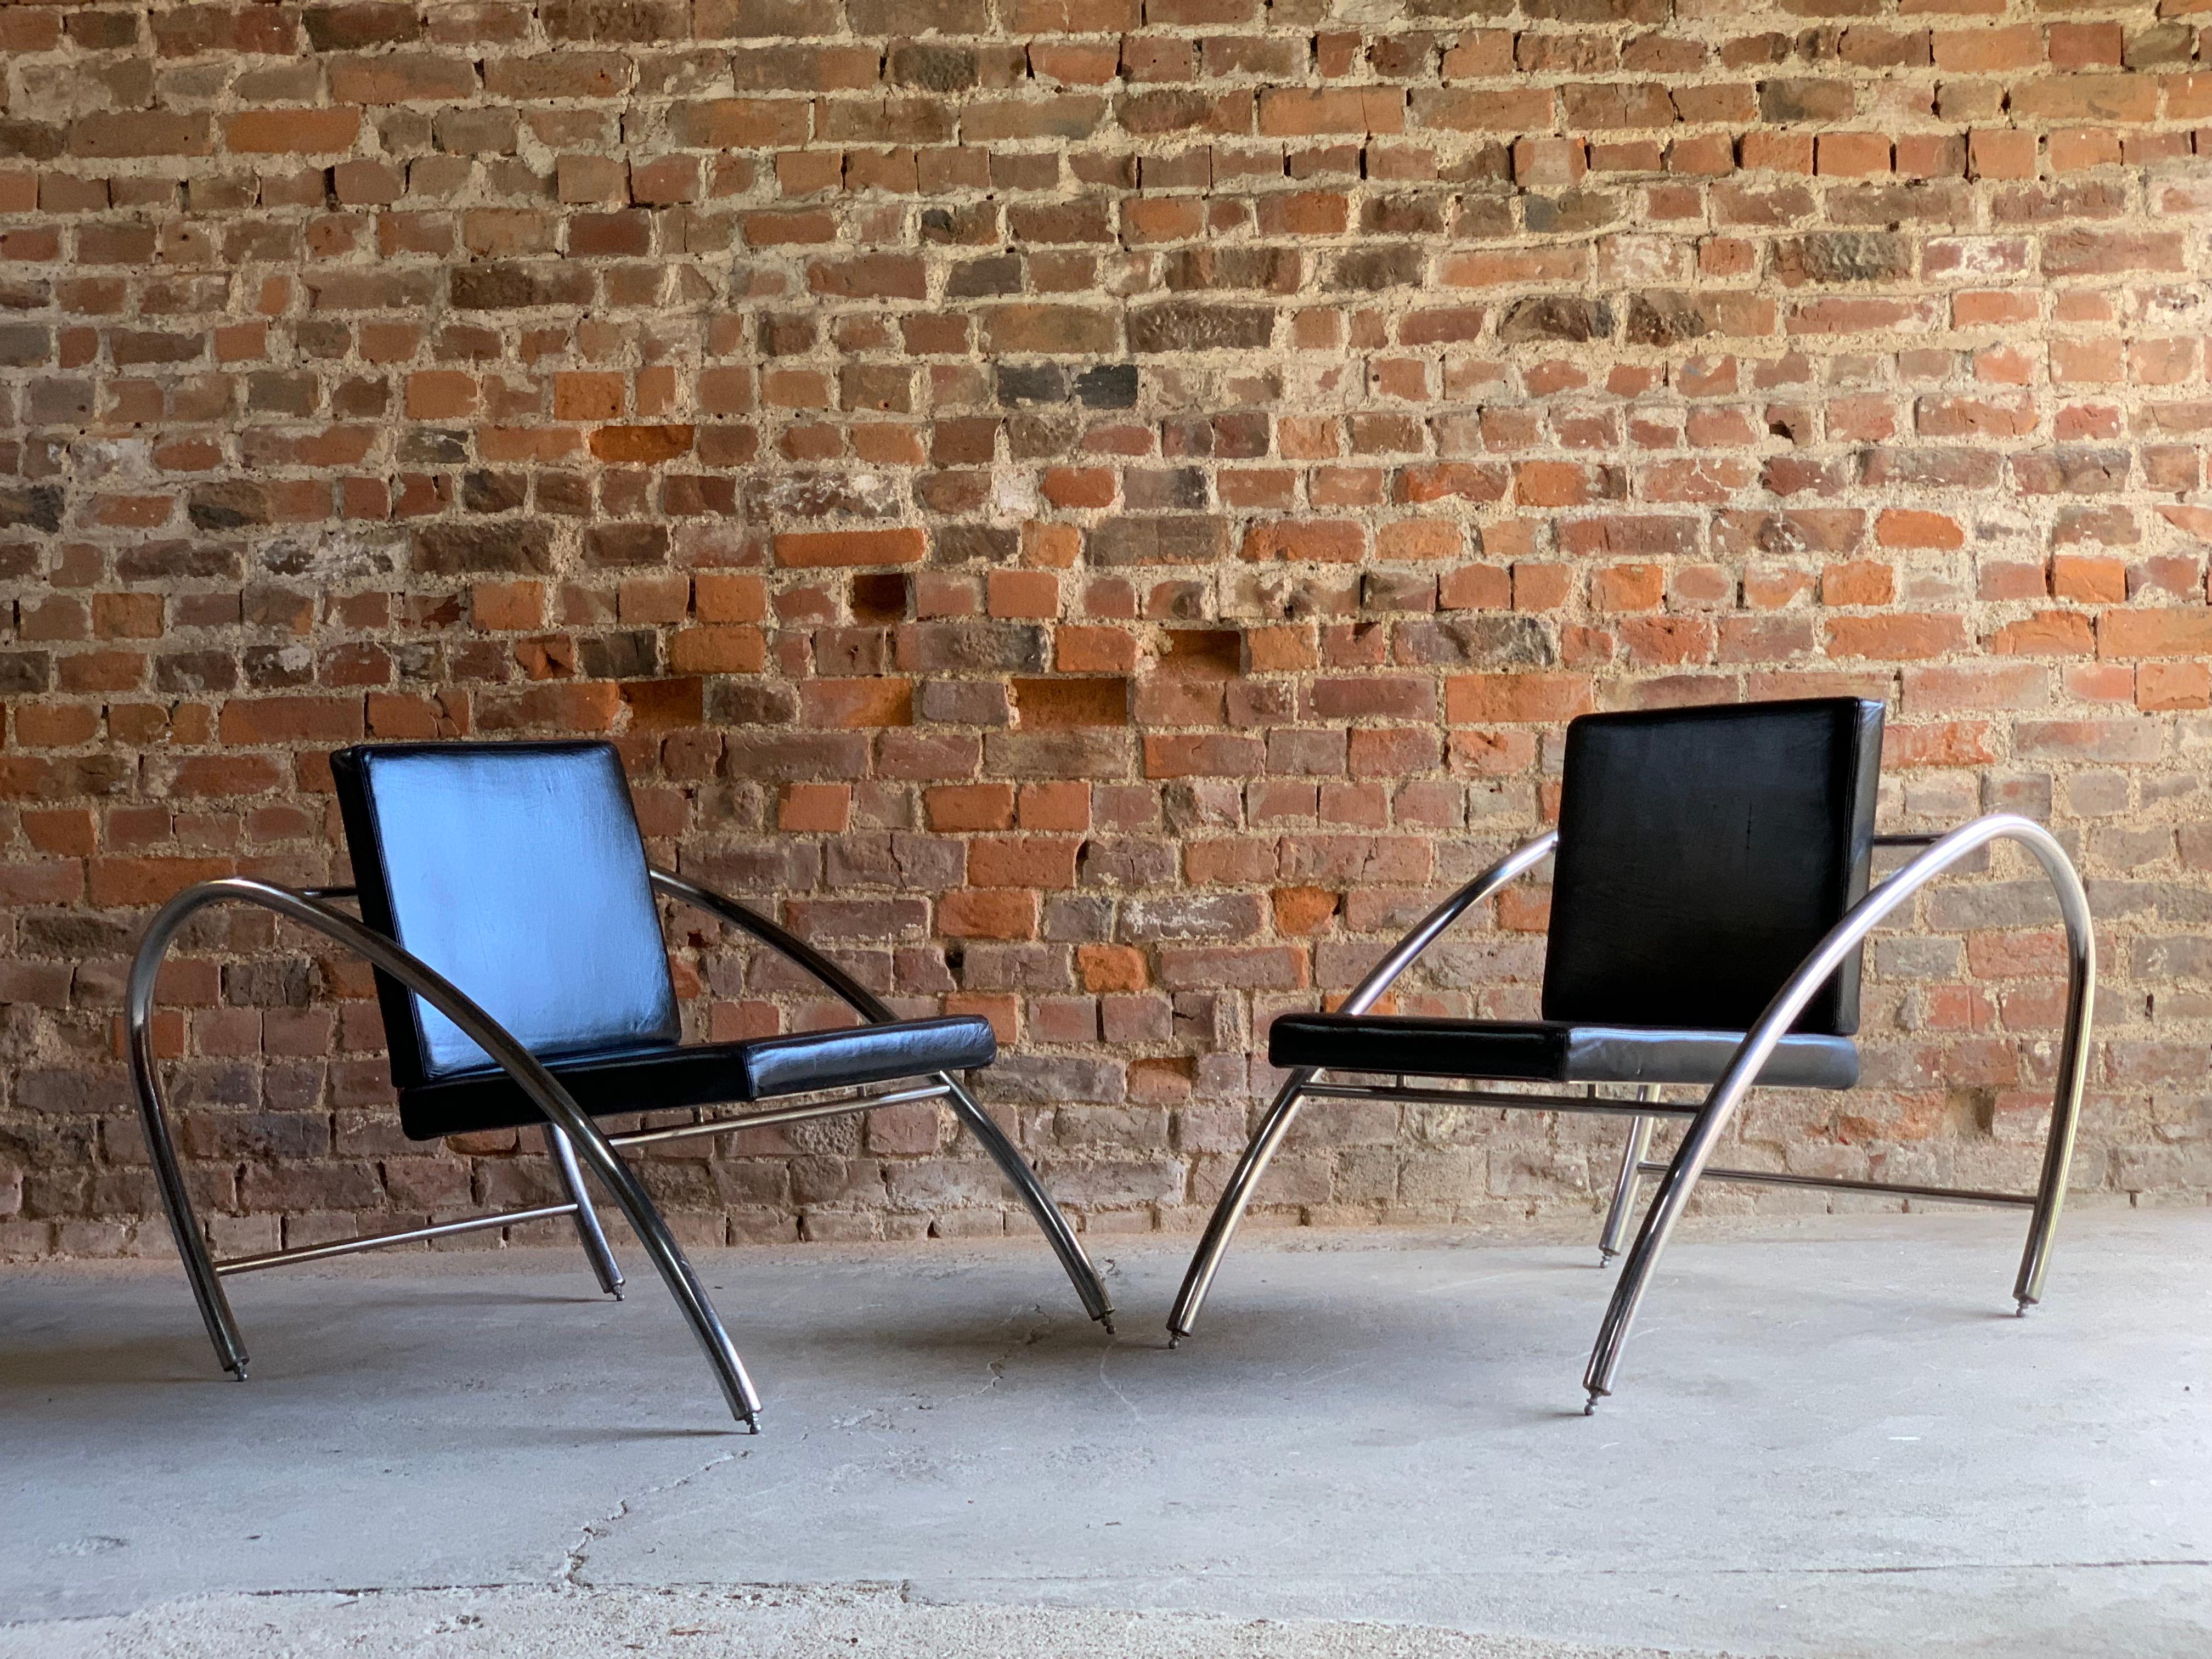 Late 20th Century Moreno Chrome & Leather Lounge Chairs by Francois Scali & Alain Domingo for Nemo